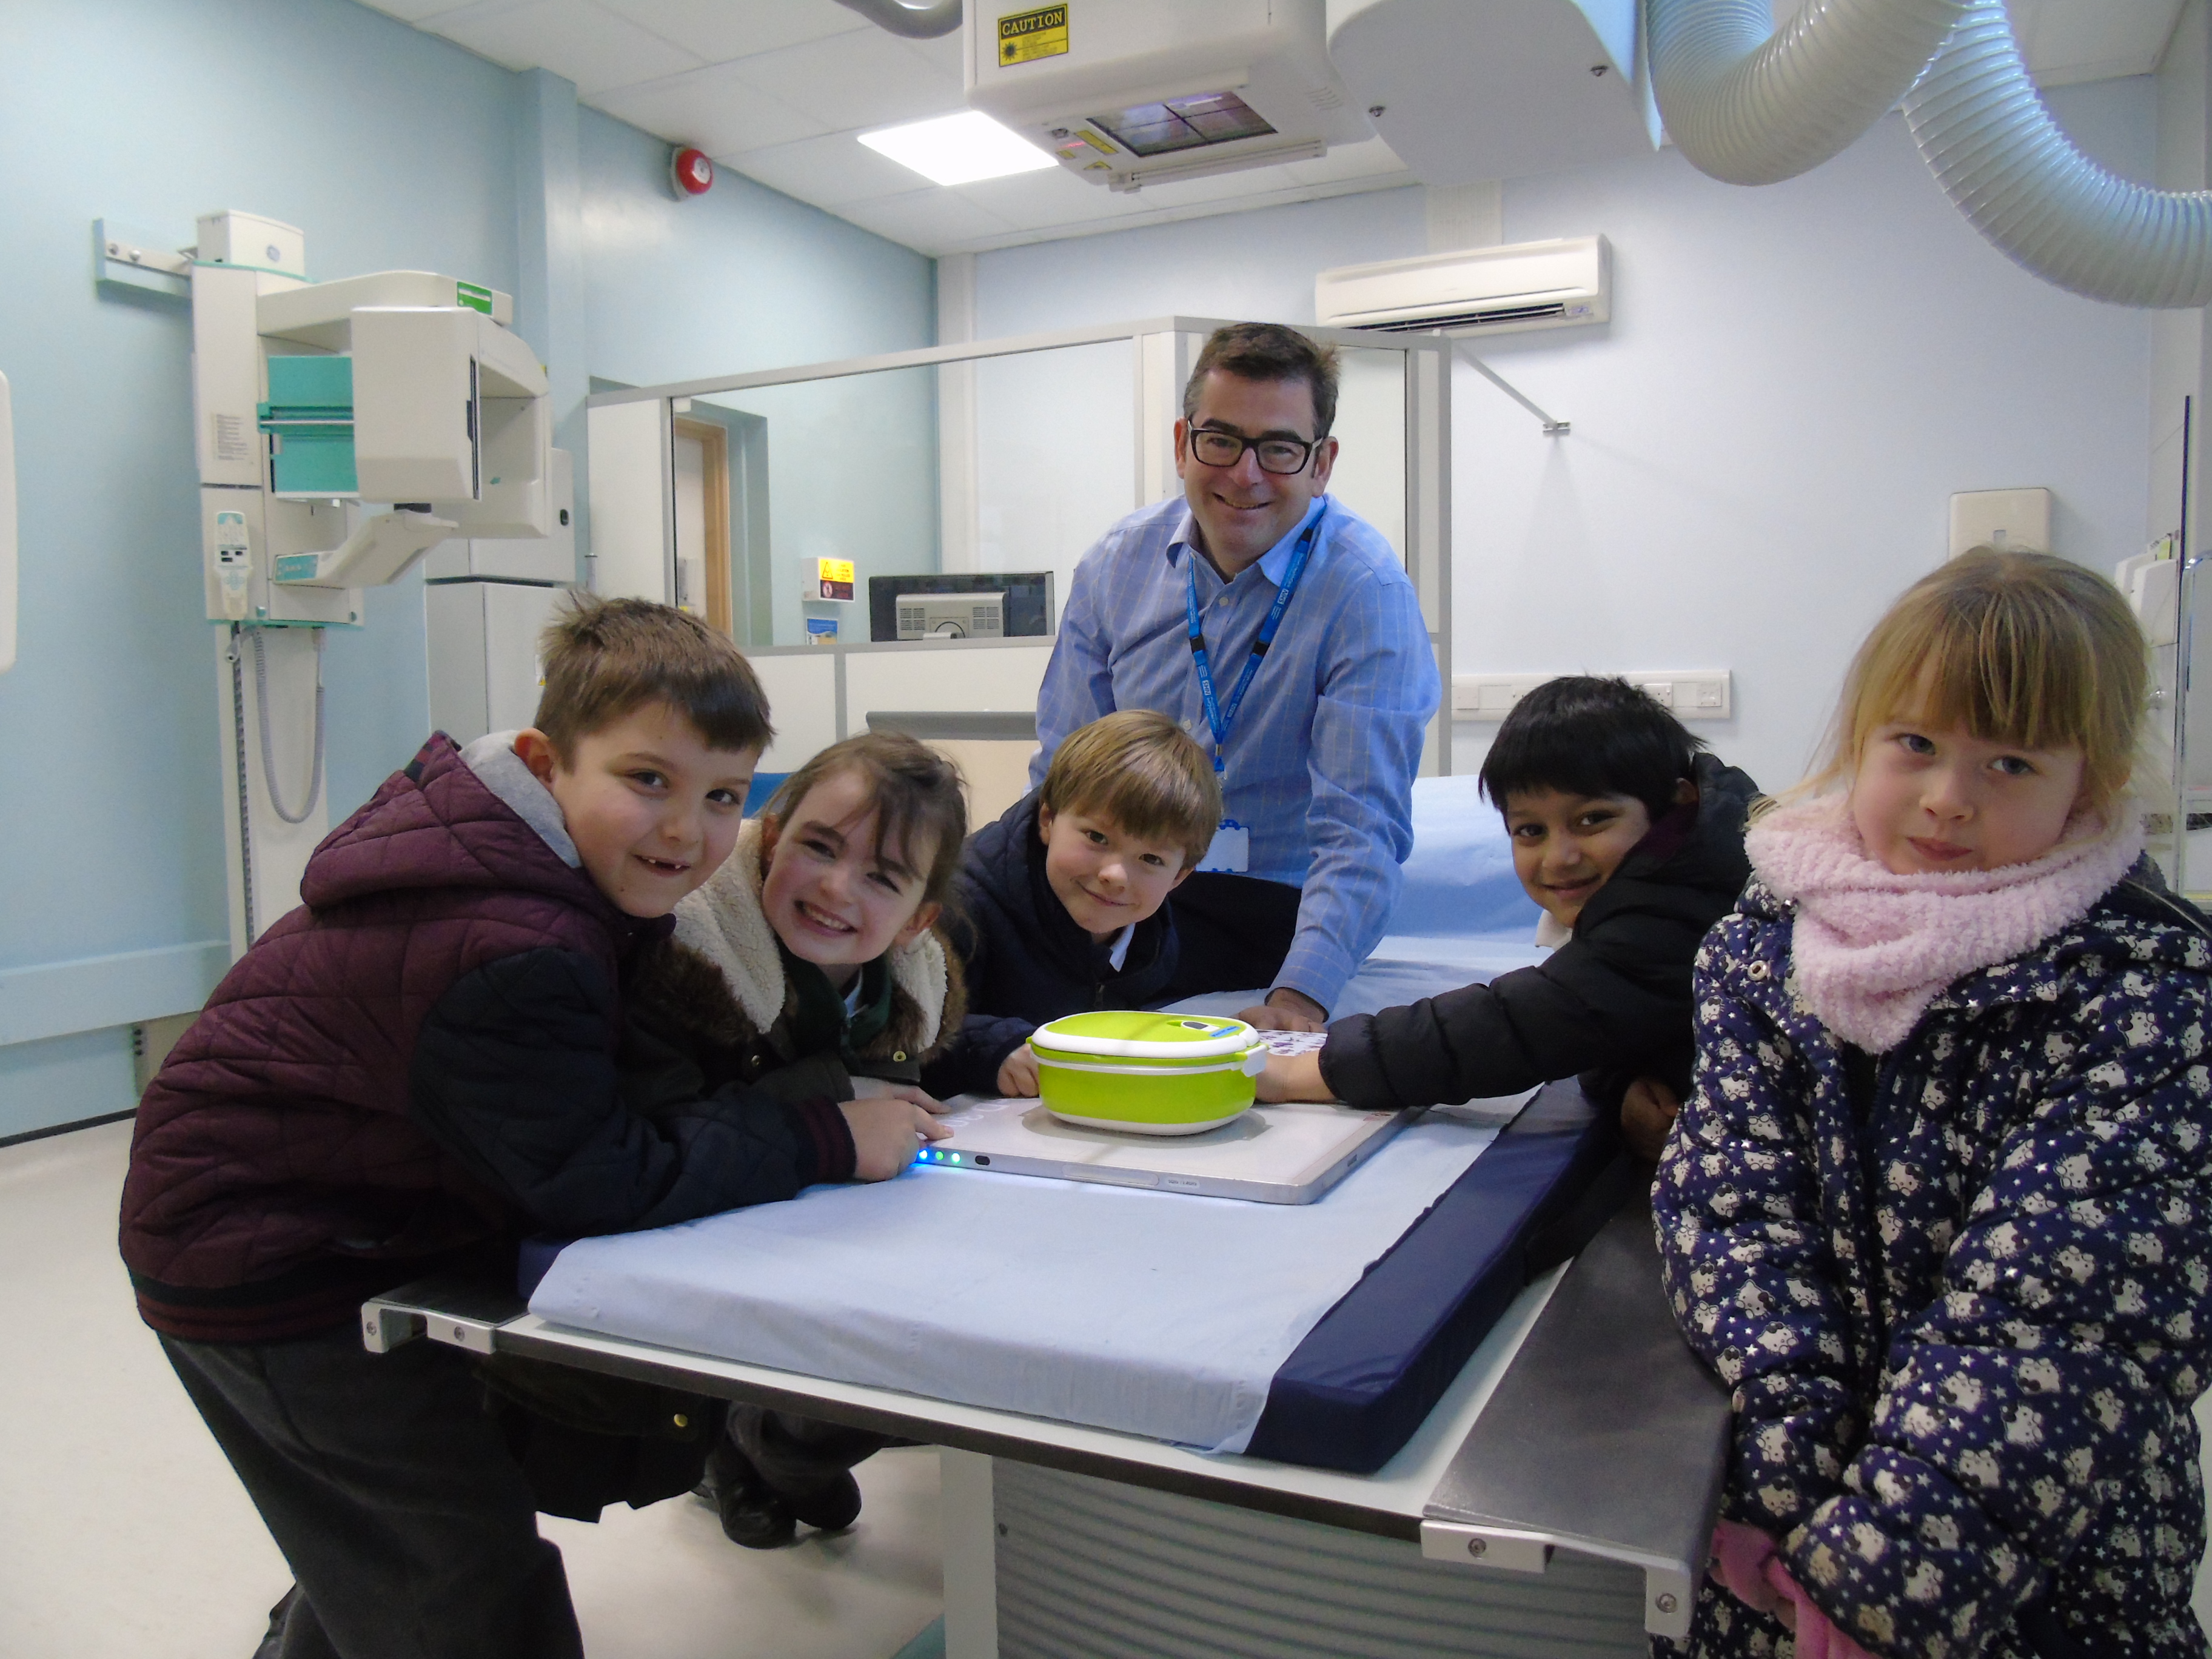 Youngsters learn that hospital visits can be fun